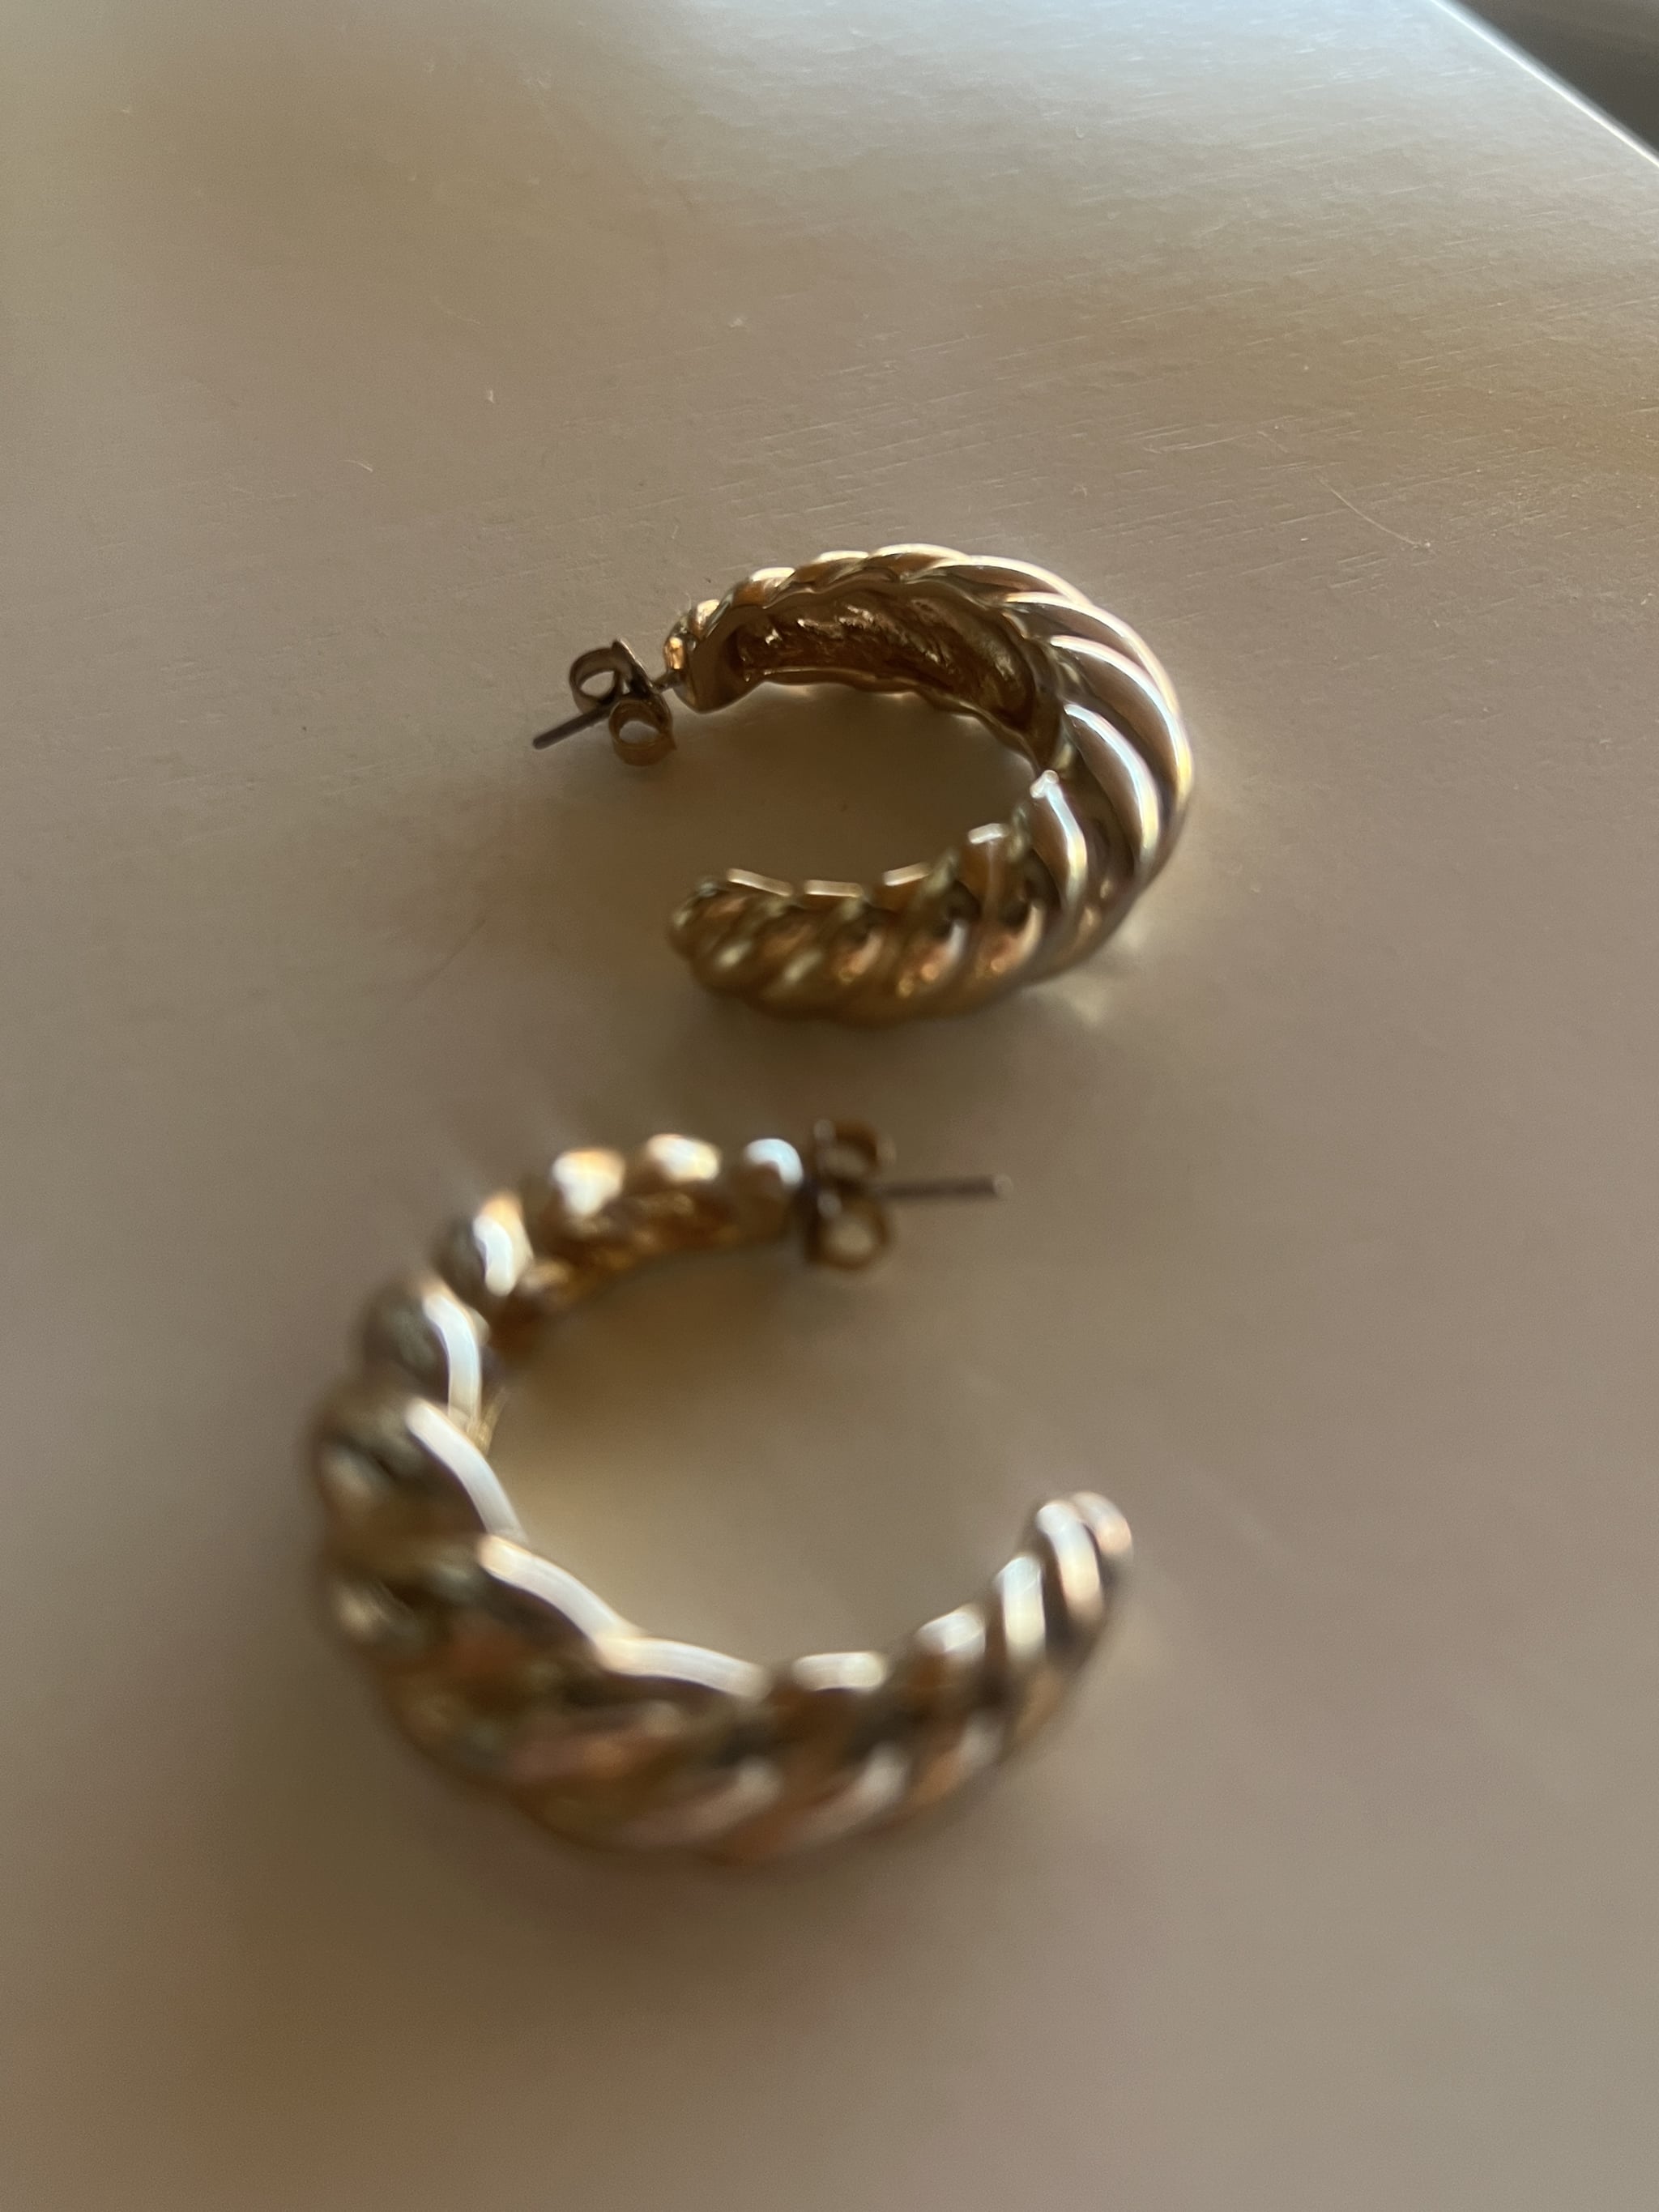 aim for a new day textured little metal hoops